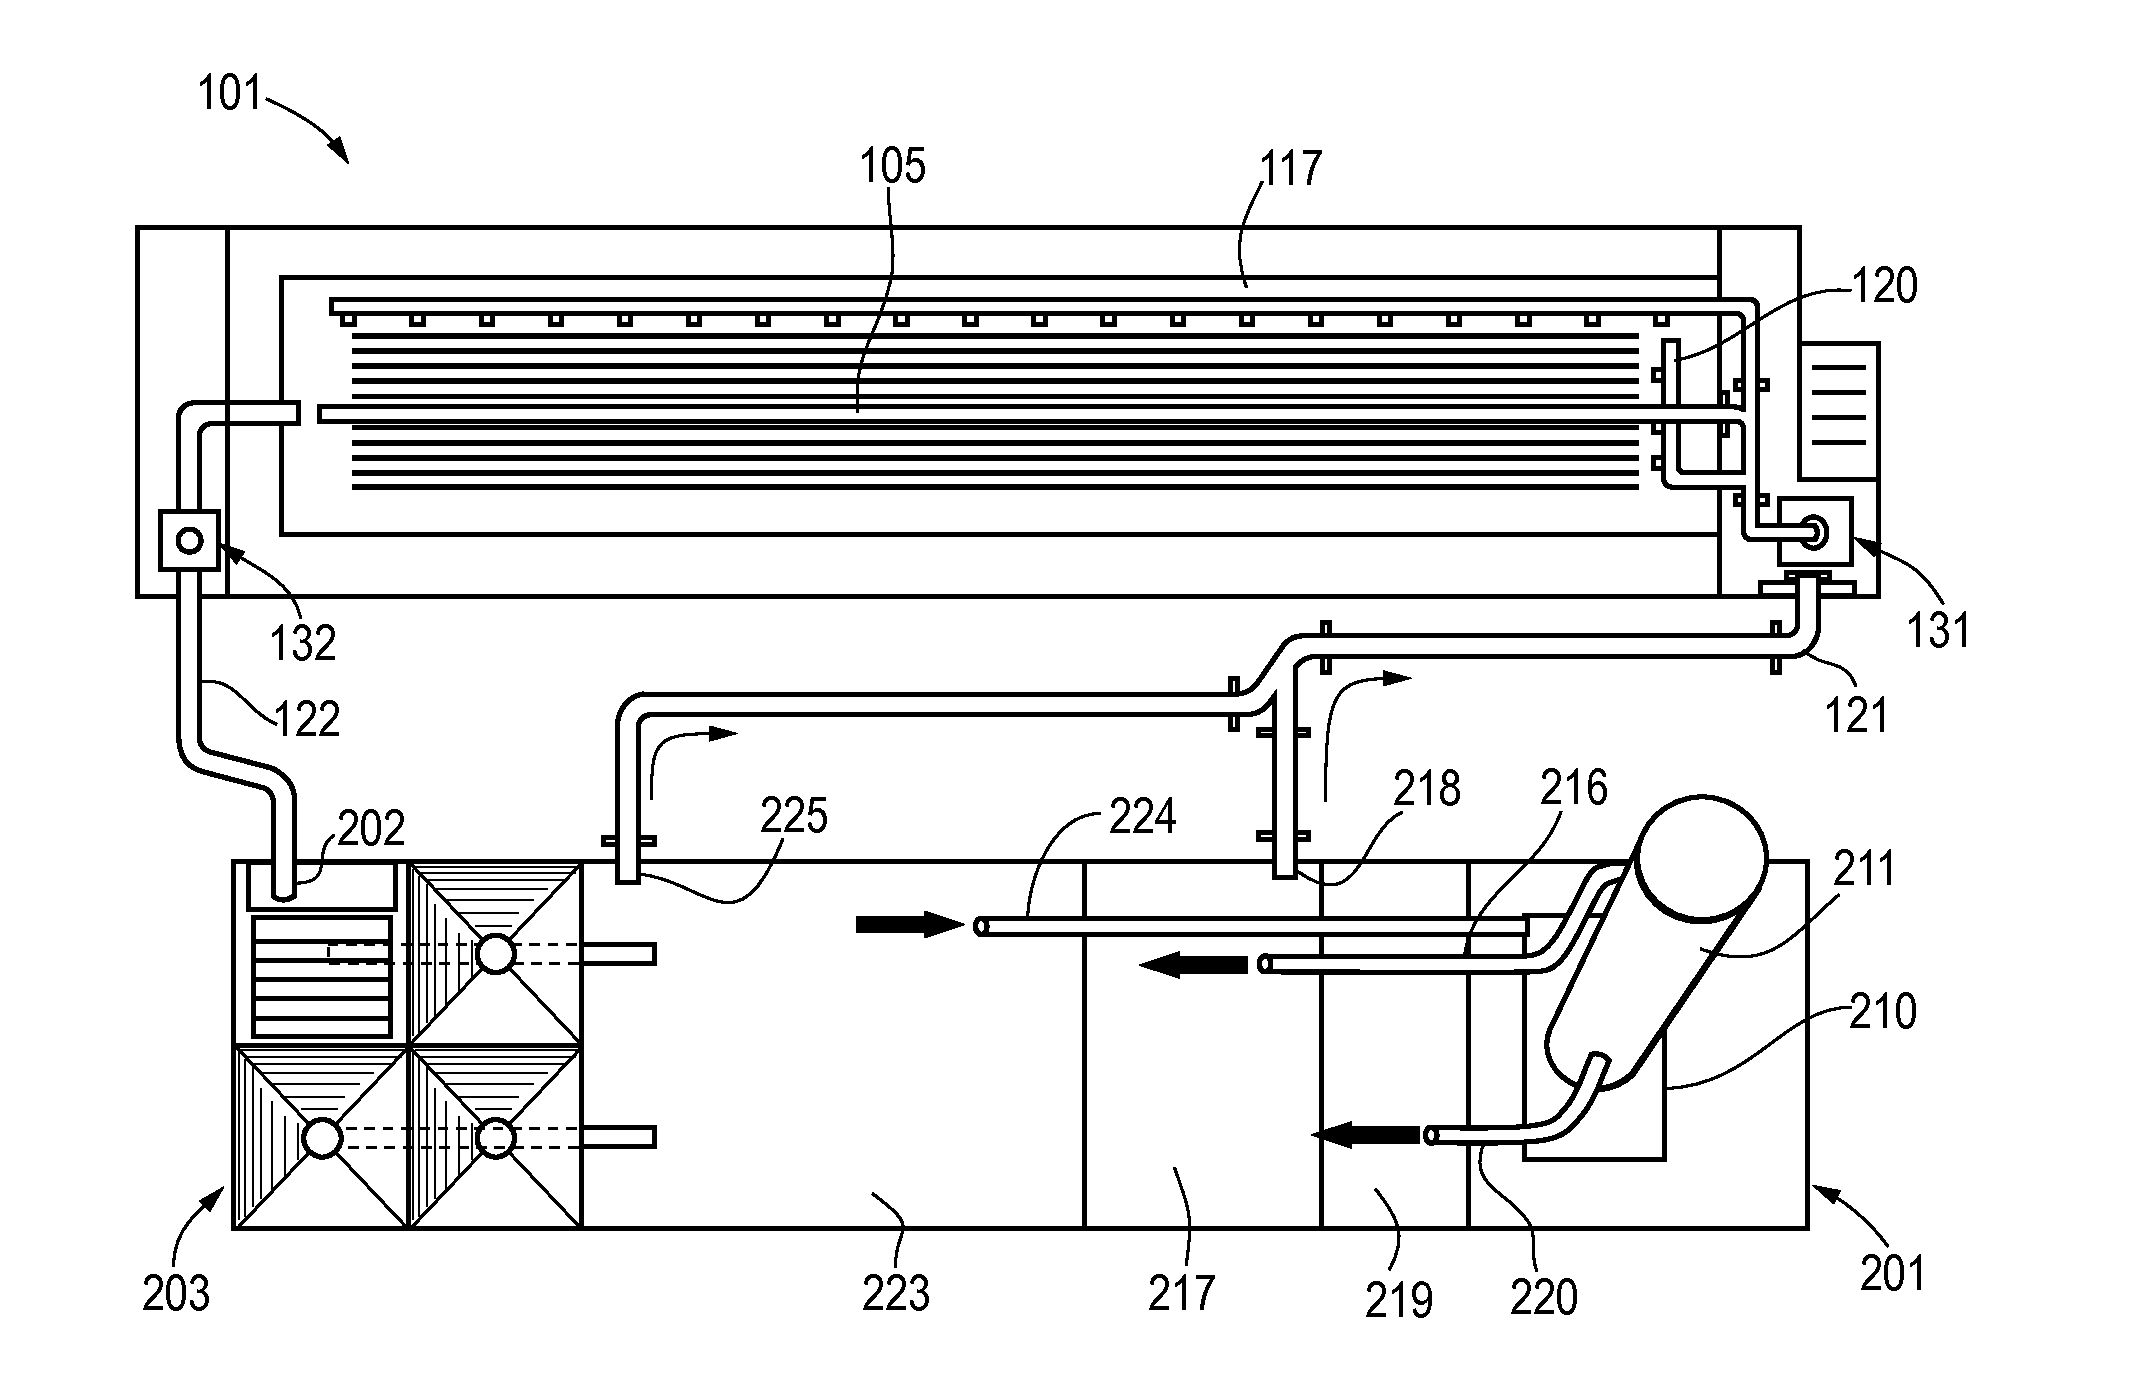 Method and system for removing hydrocarbon deposits from heat exchanger tube bundles